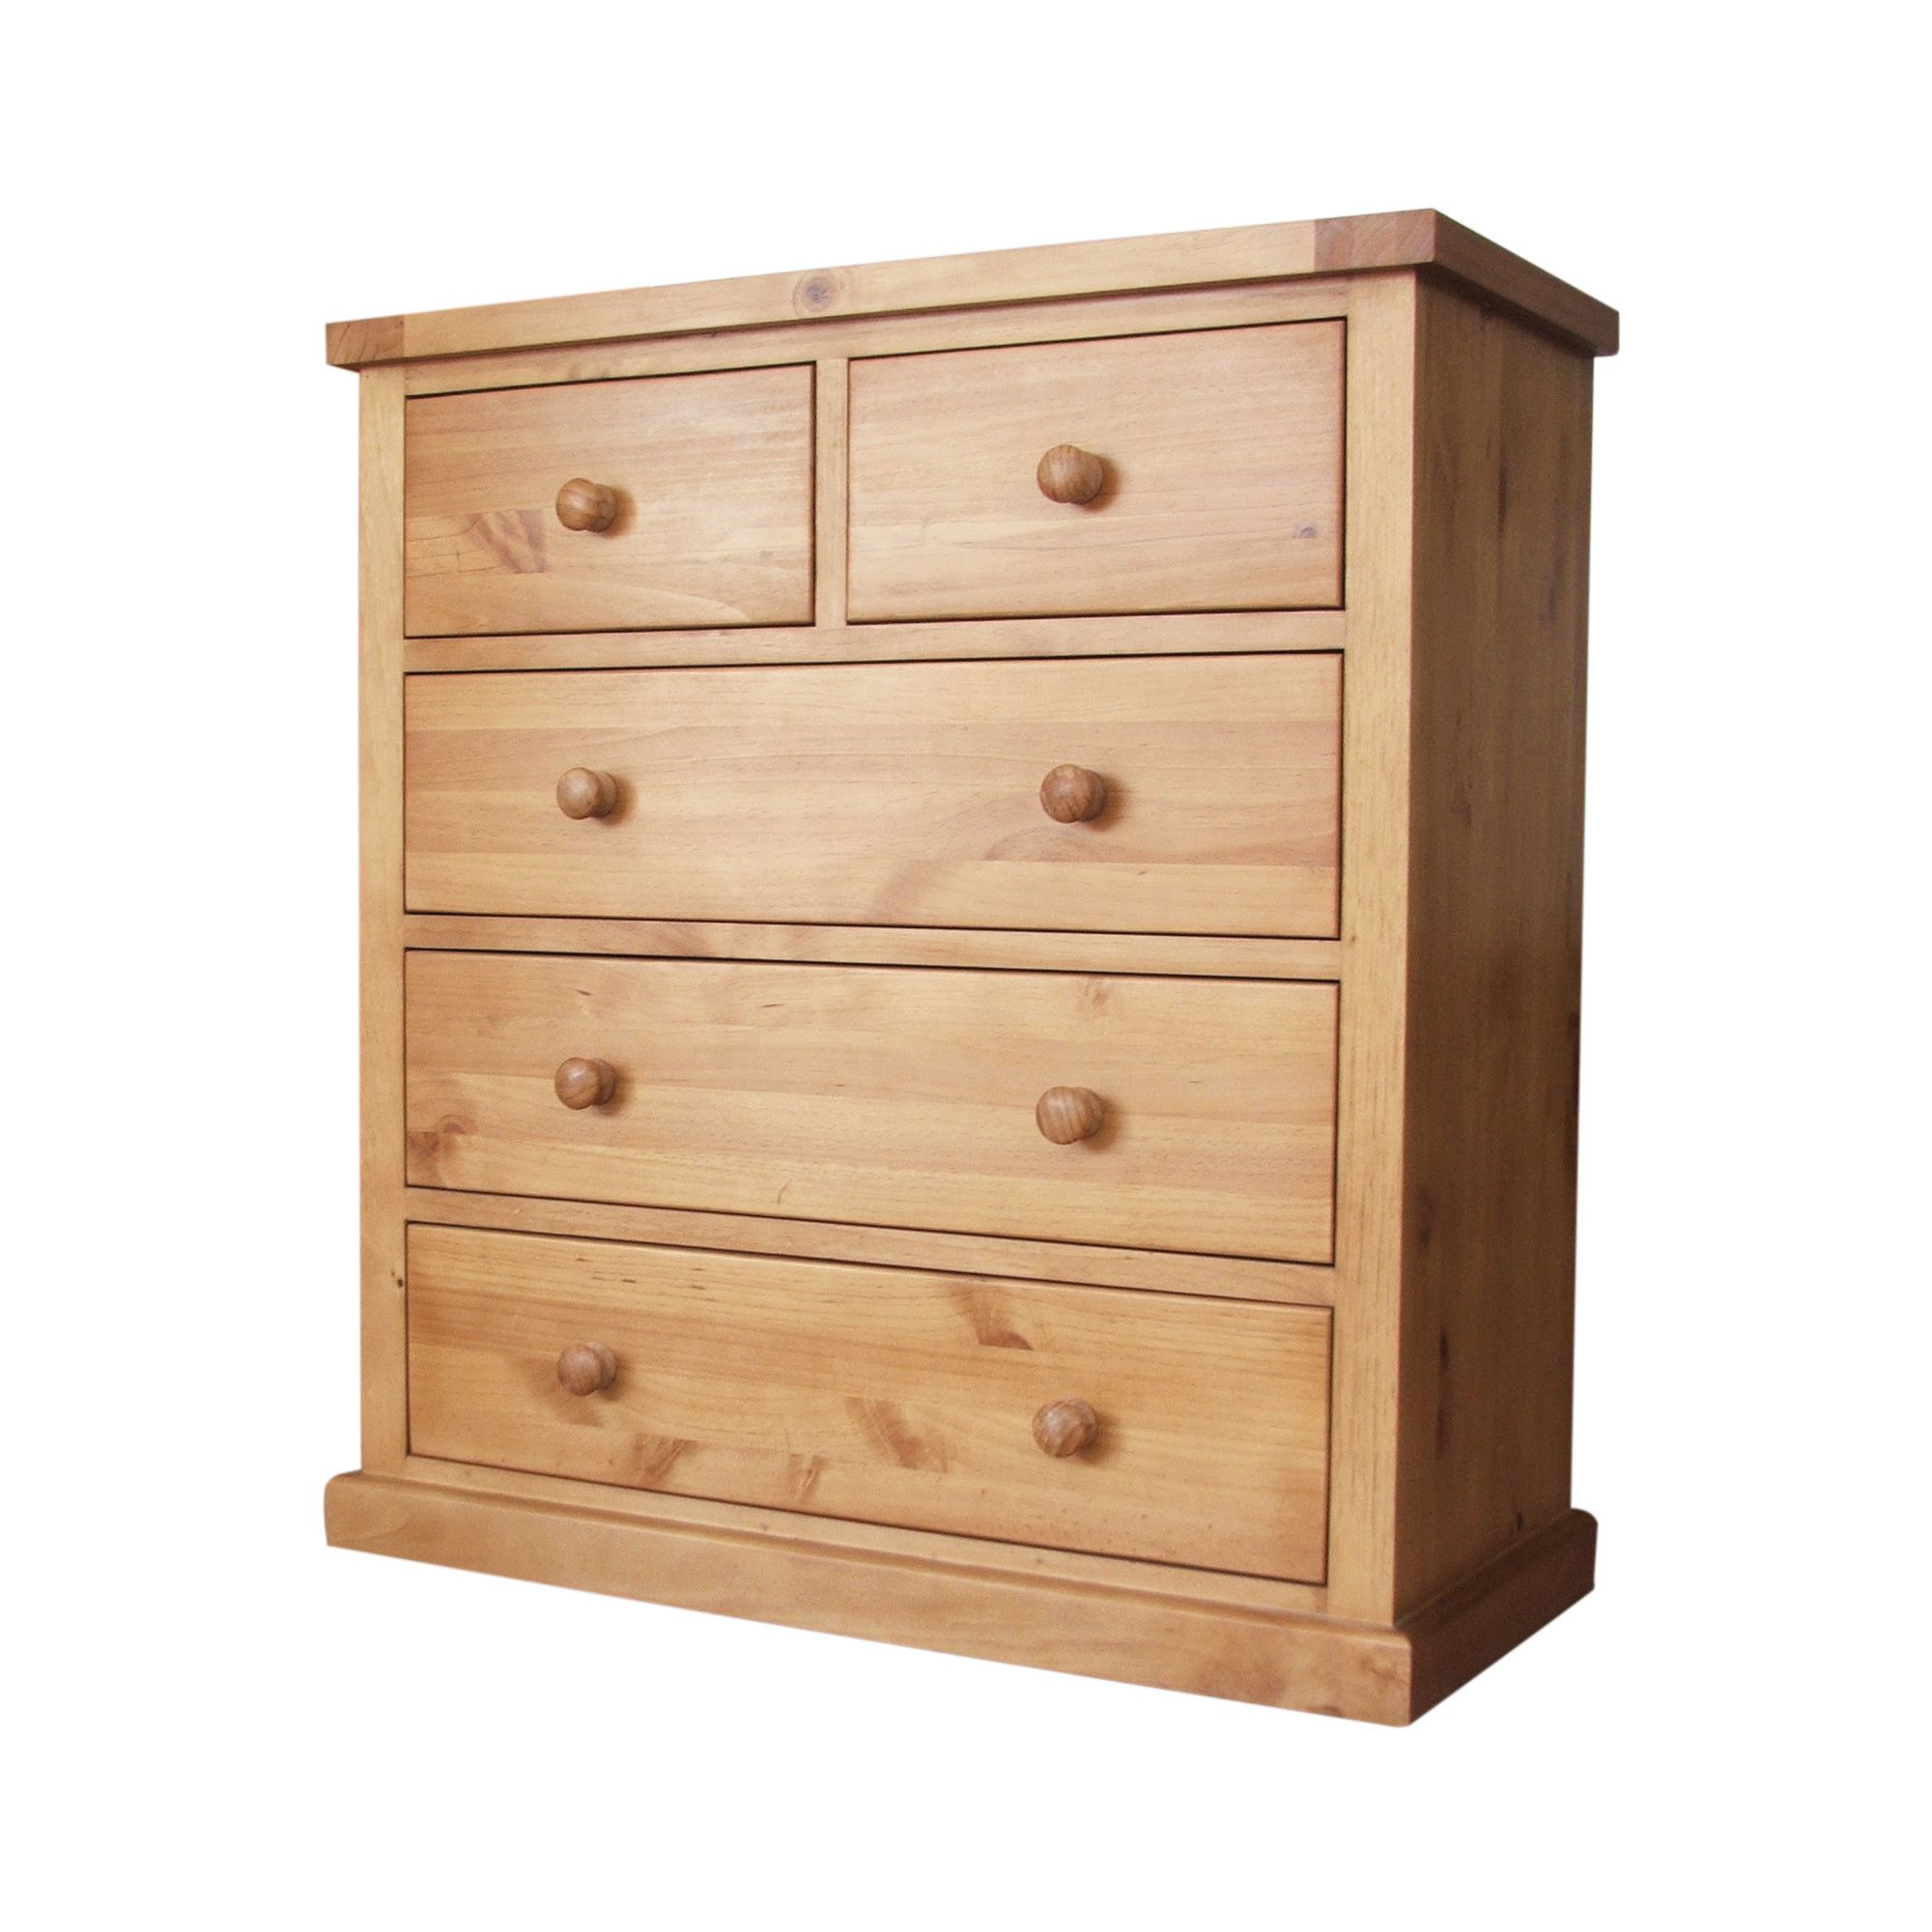 Thorndon Kempton Bedroom Five Drawer Chest in Hand Waxed at Tesco Direct